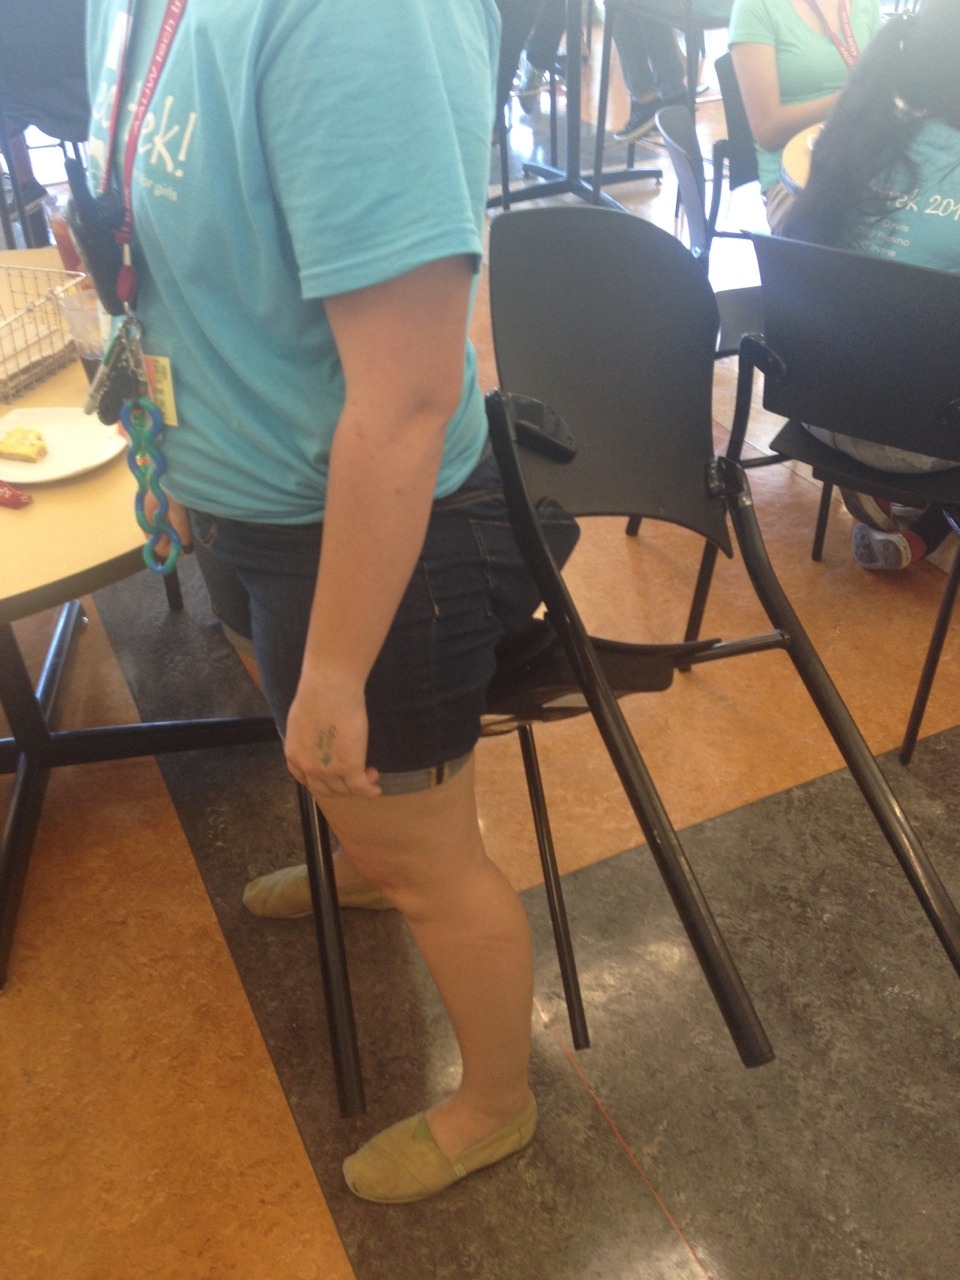 I’m at camp, and the chairs keep getting stuck on my pockets, with or without things in them. This time I got up and I took the chair with me. This is what I mean by misadventures having this booty.